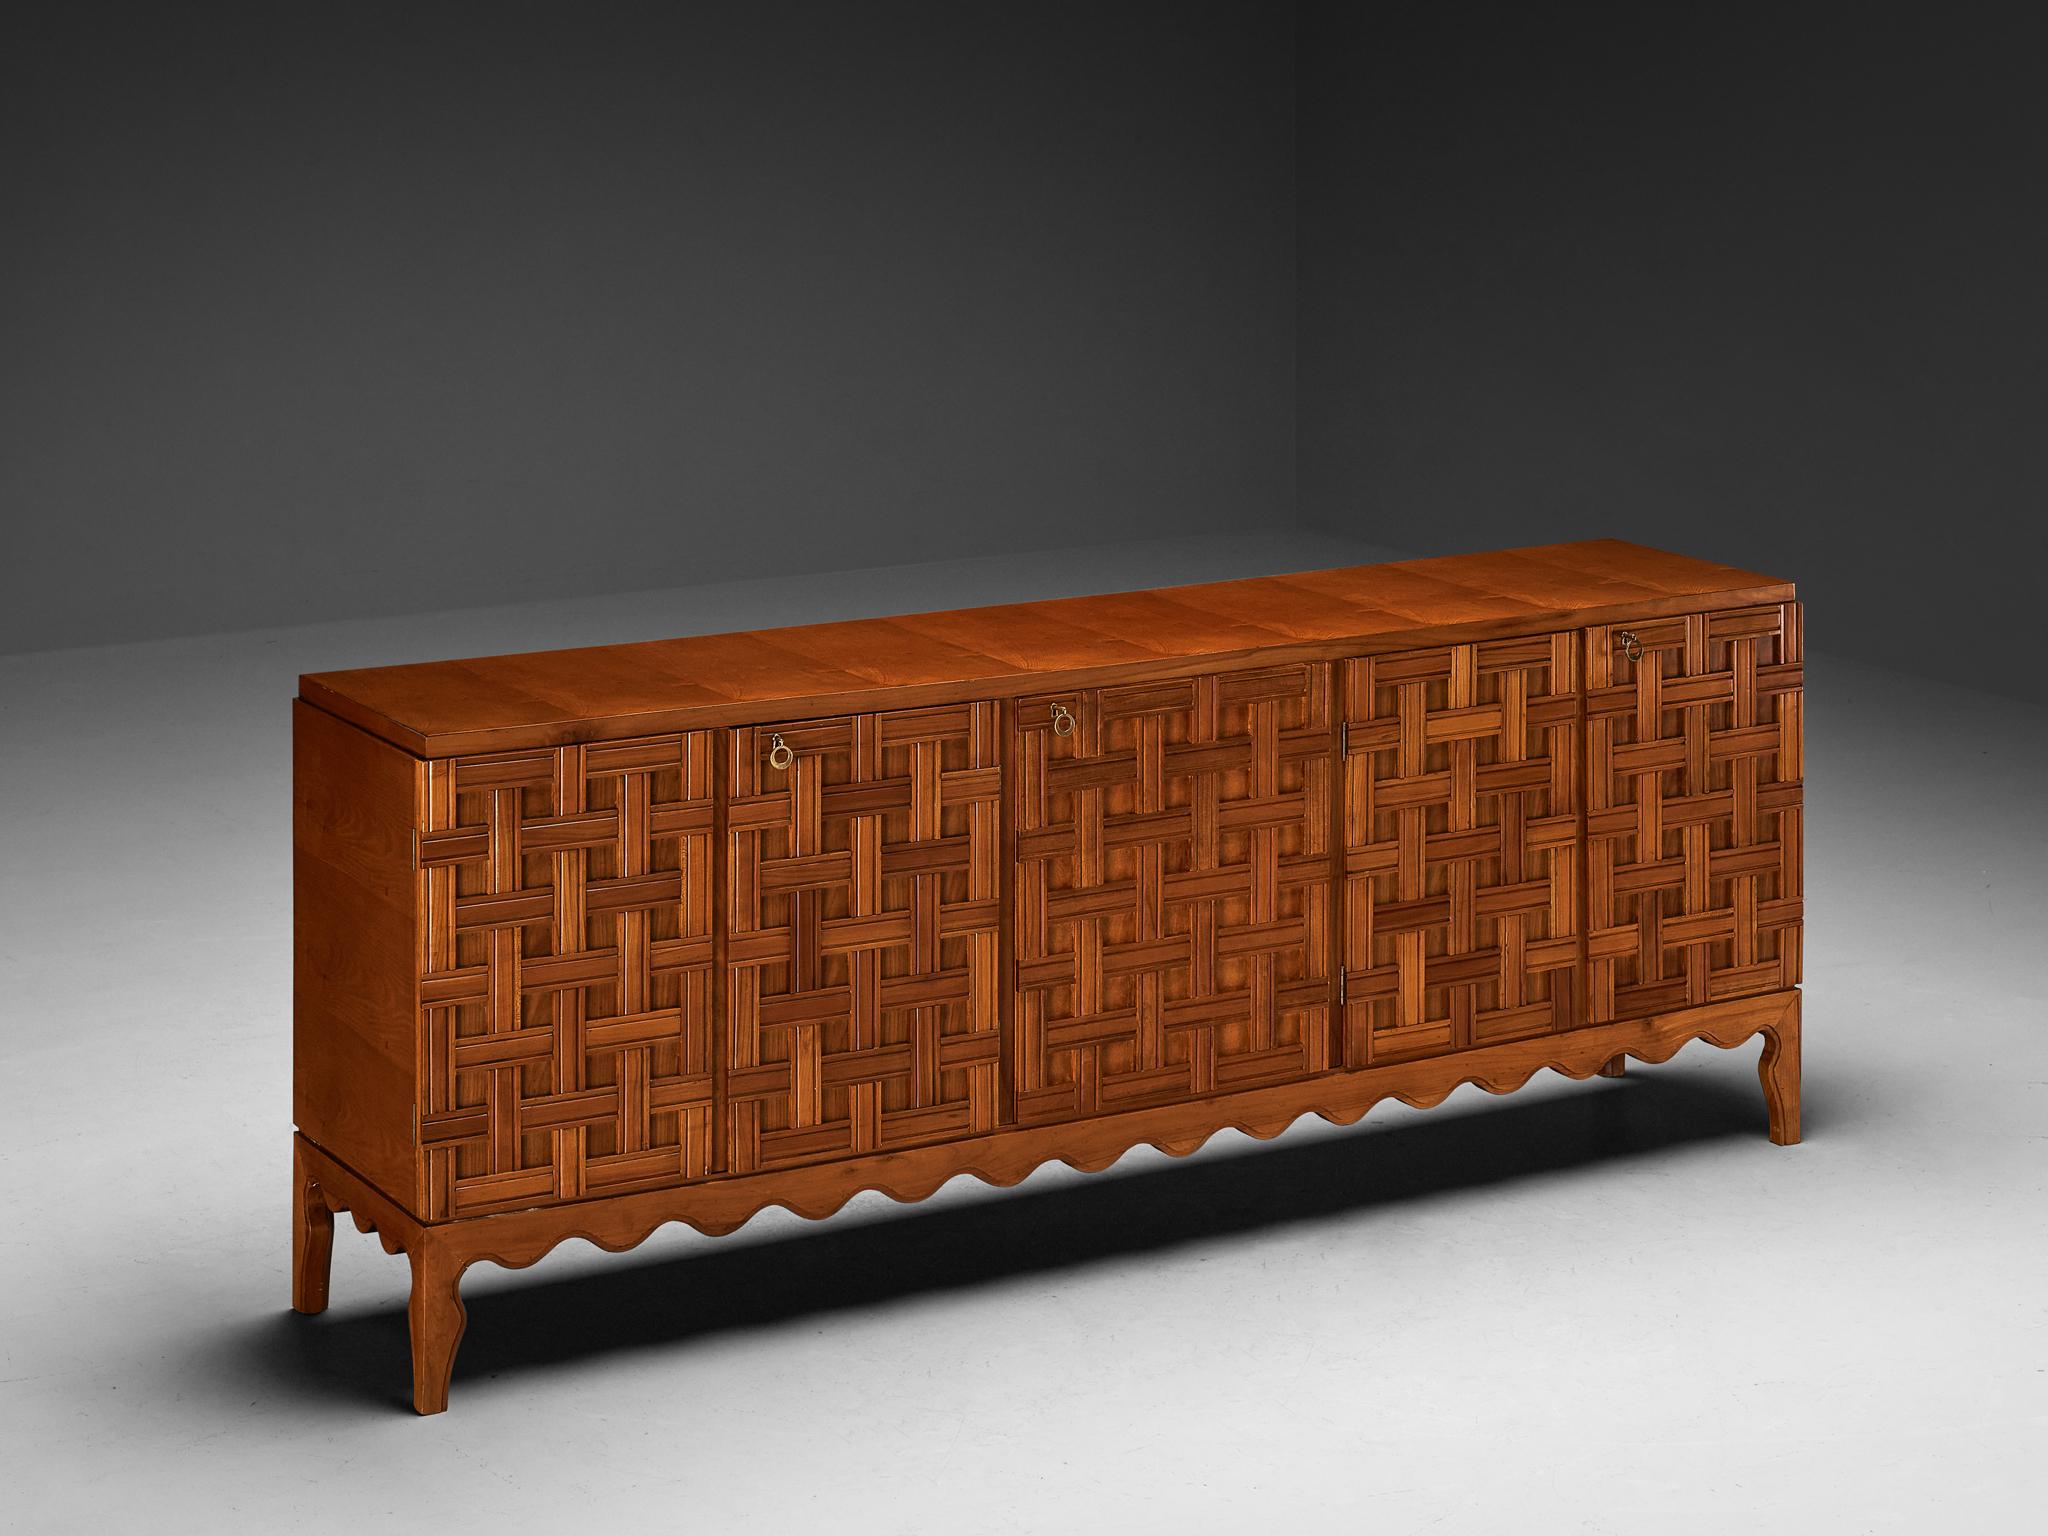 Paolo Buffa, sideboard, cherry, mahogany, brass, mirrored glass, glass, Italy, 1940s

Crafted by the visionary Italian designer and architect Paolo Buffa (1903-1970), this rare credenza exudes a refined decorative allure. It serves as a